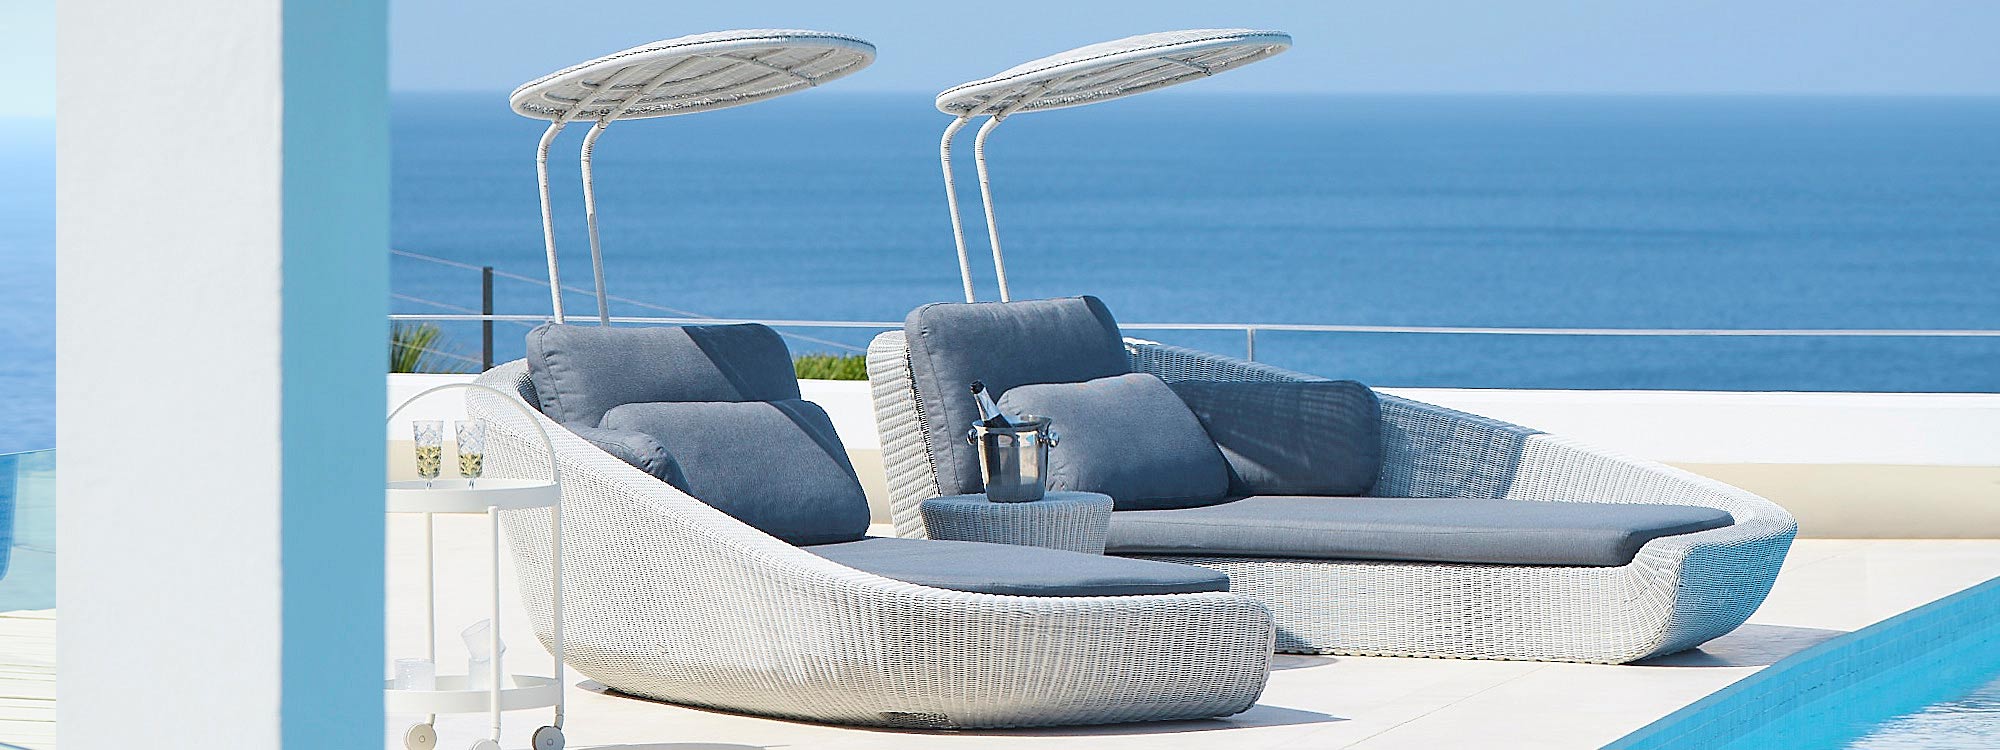 Image of pair of White-grey Savannah woven outdoor daybeds with grey cushions by Cane-line, shown on sizzling terrace with sparkling sea in background